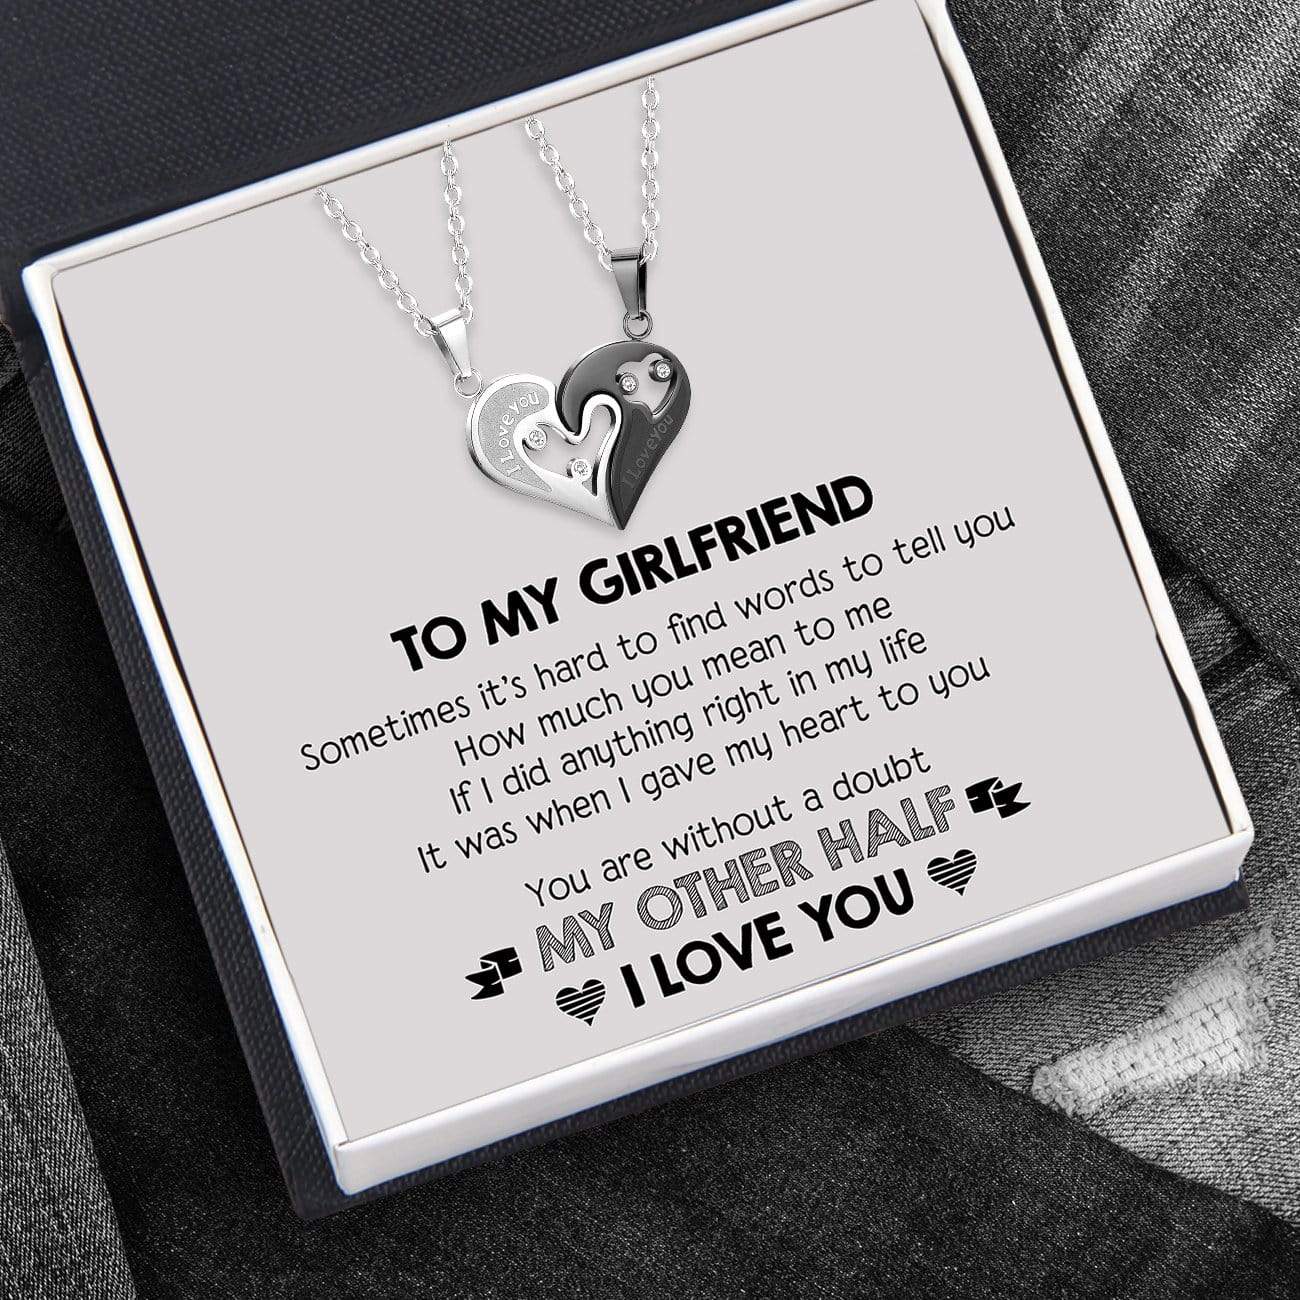 Couple Heart Necklaces - To My Girlfriend - How Much You Mean To Me - Ukglt13006